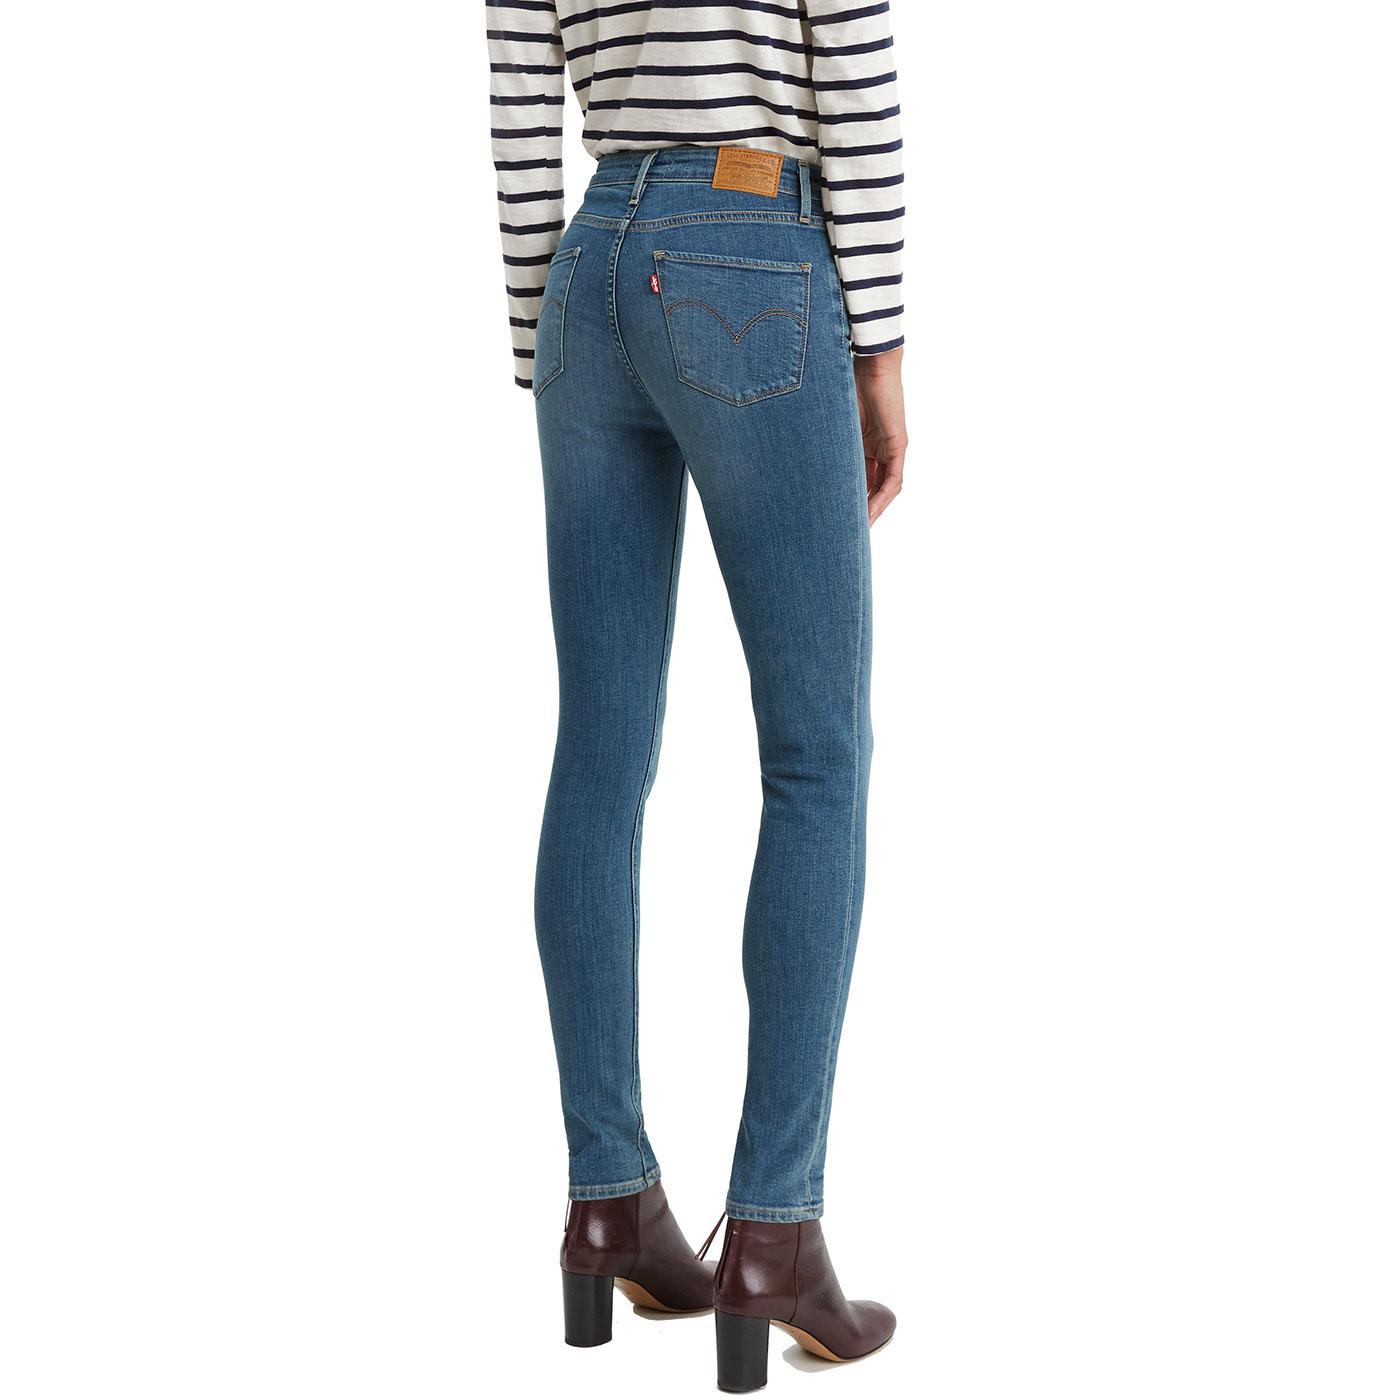 721 levi's high rise jeans